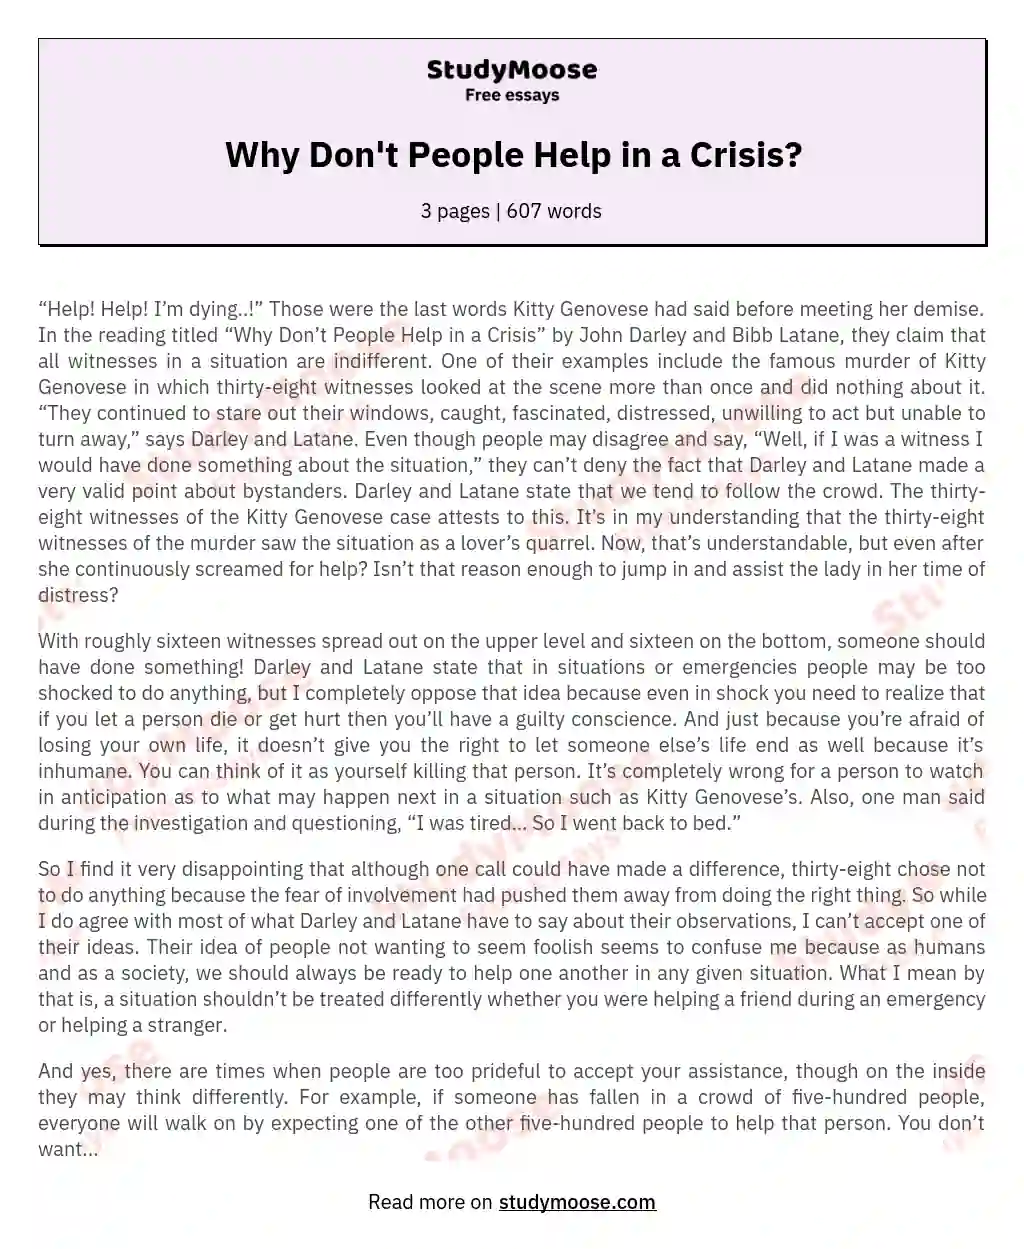 Why Don't People Help in a Crisis? essay